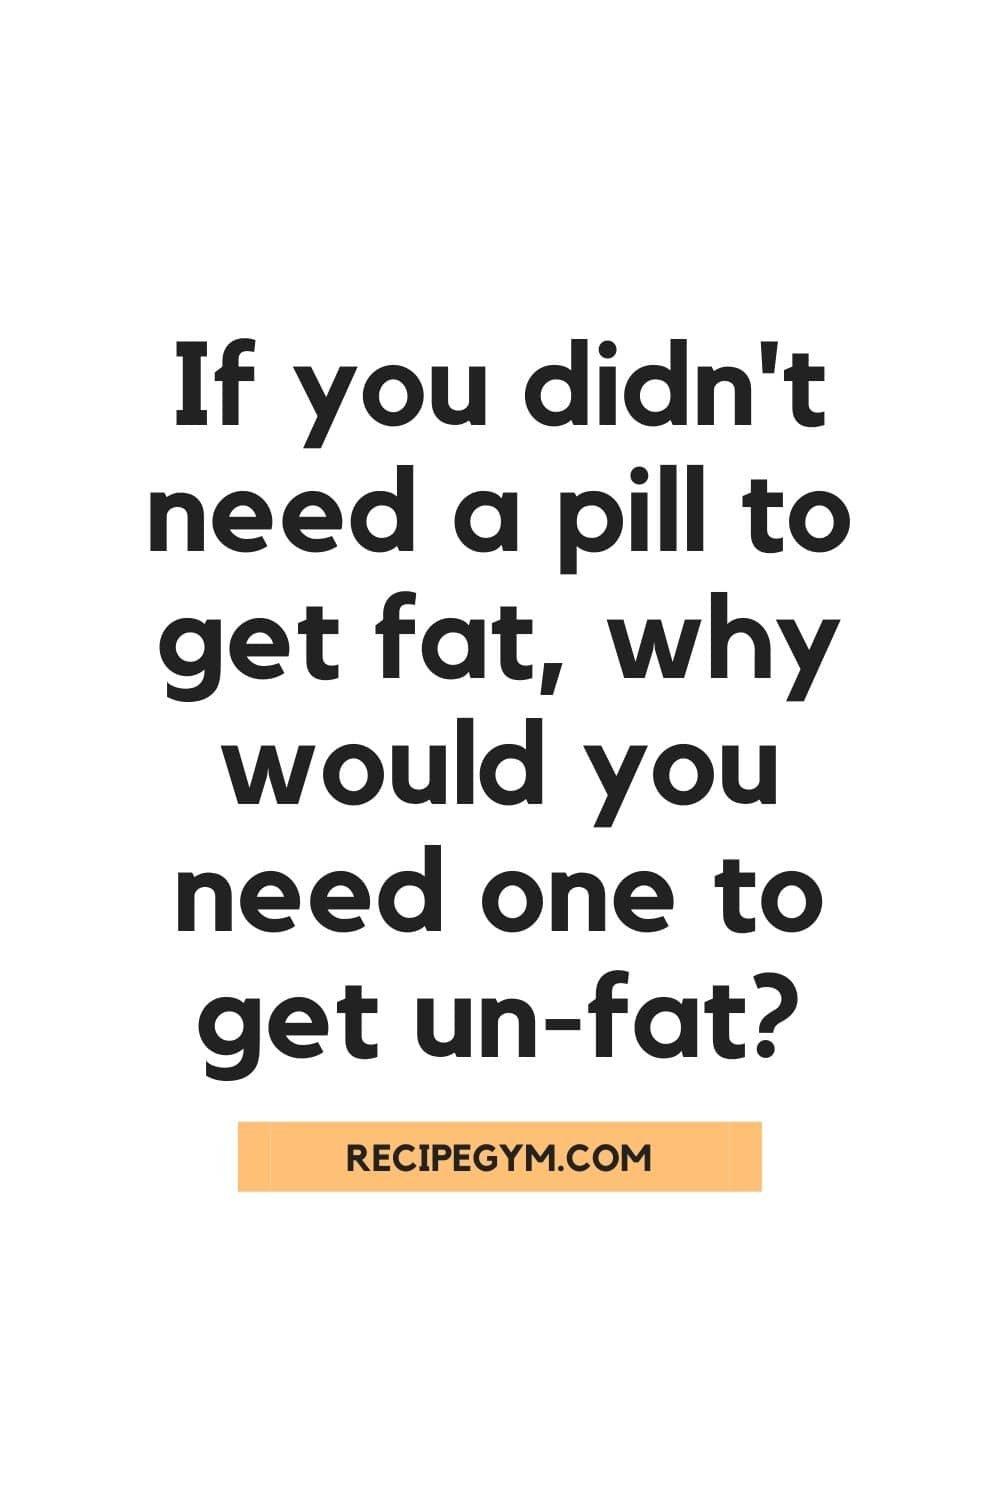 If you didnt need a pill to get fat why would you need one to get un fat